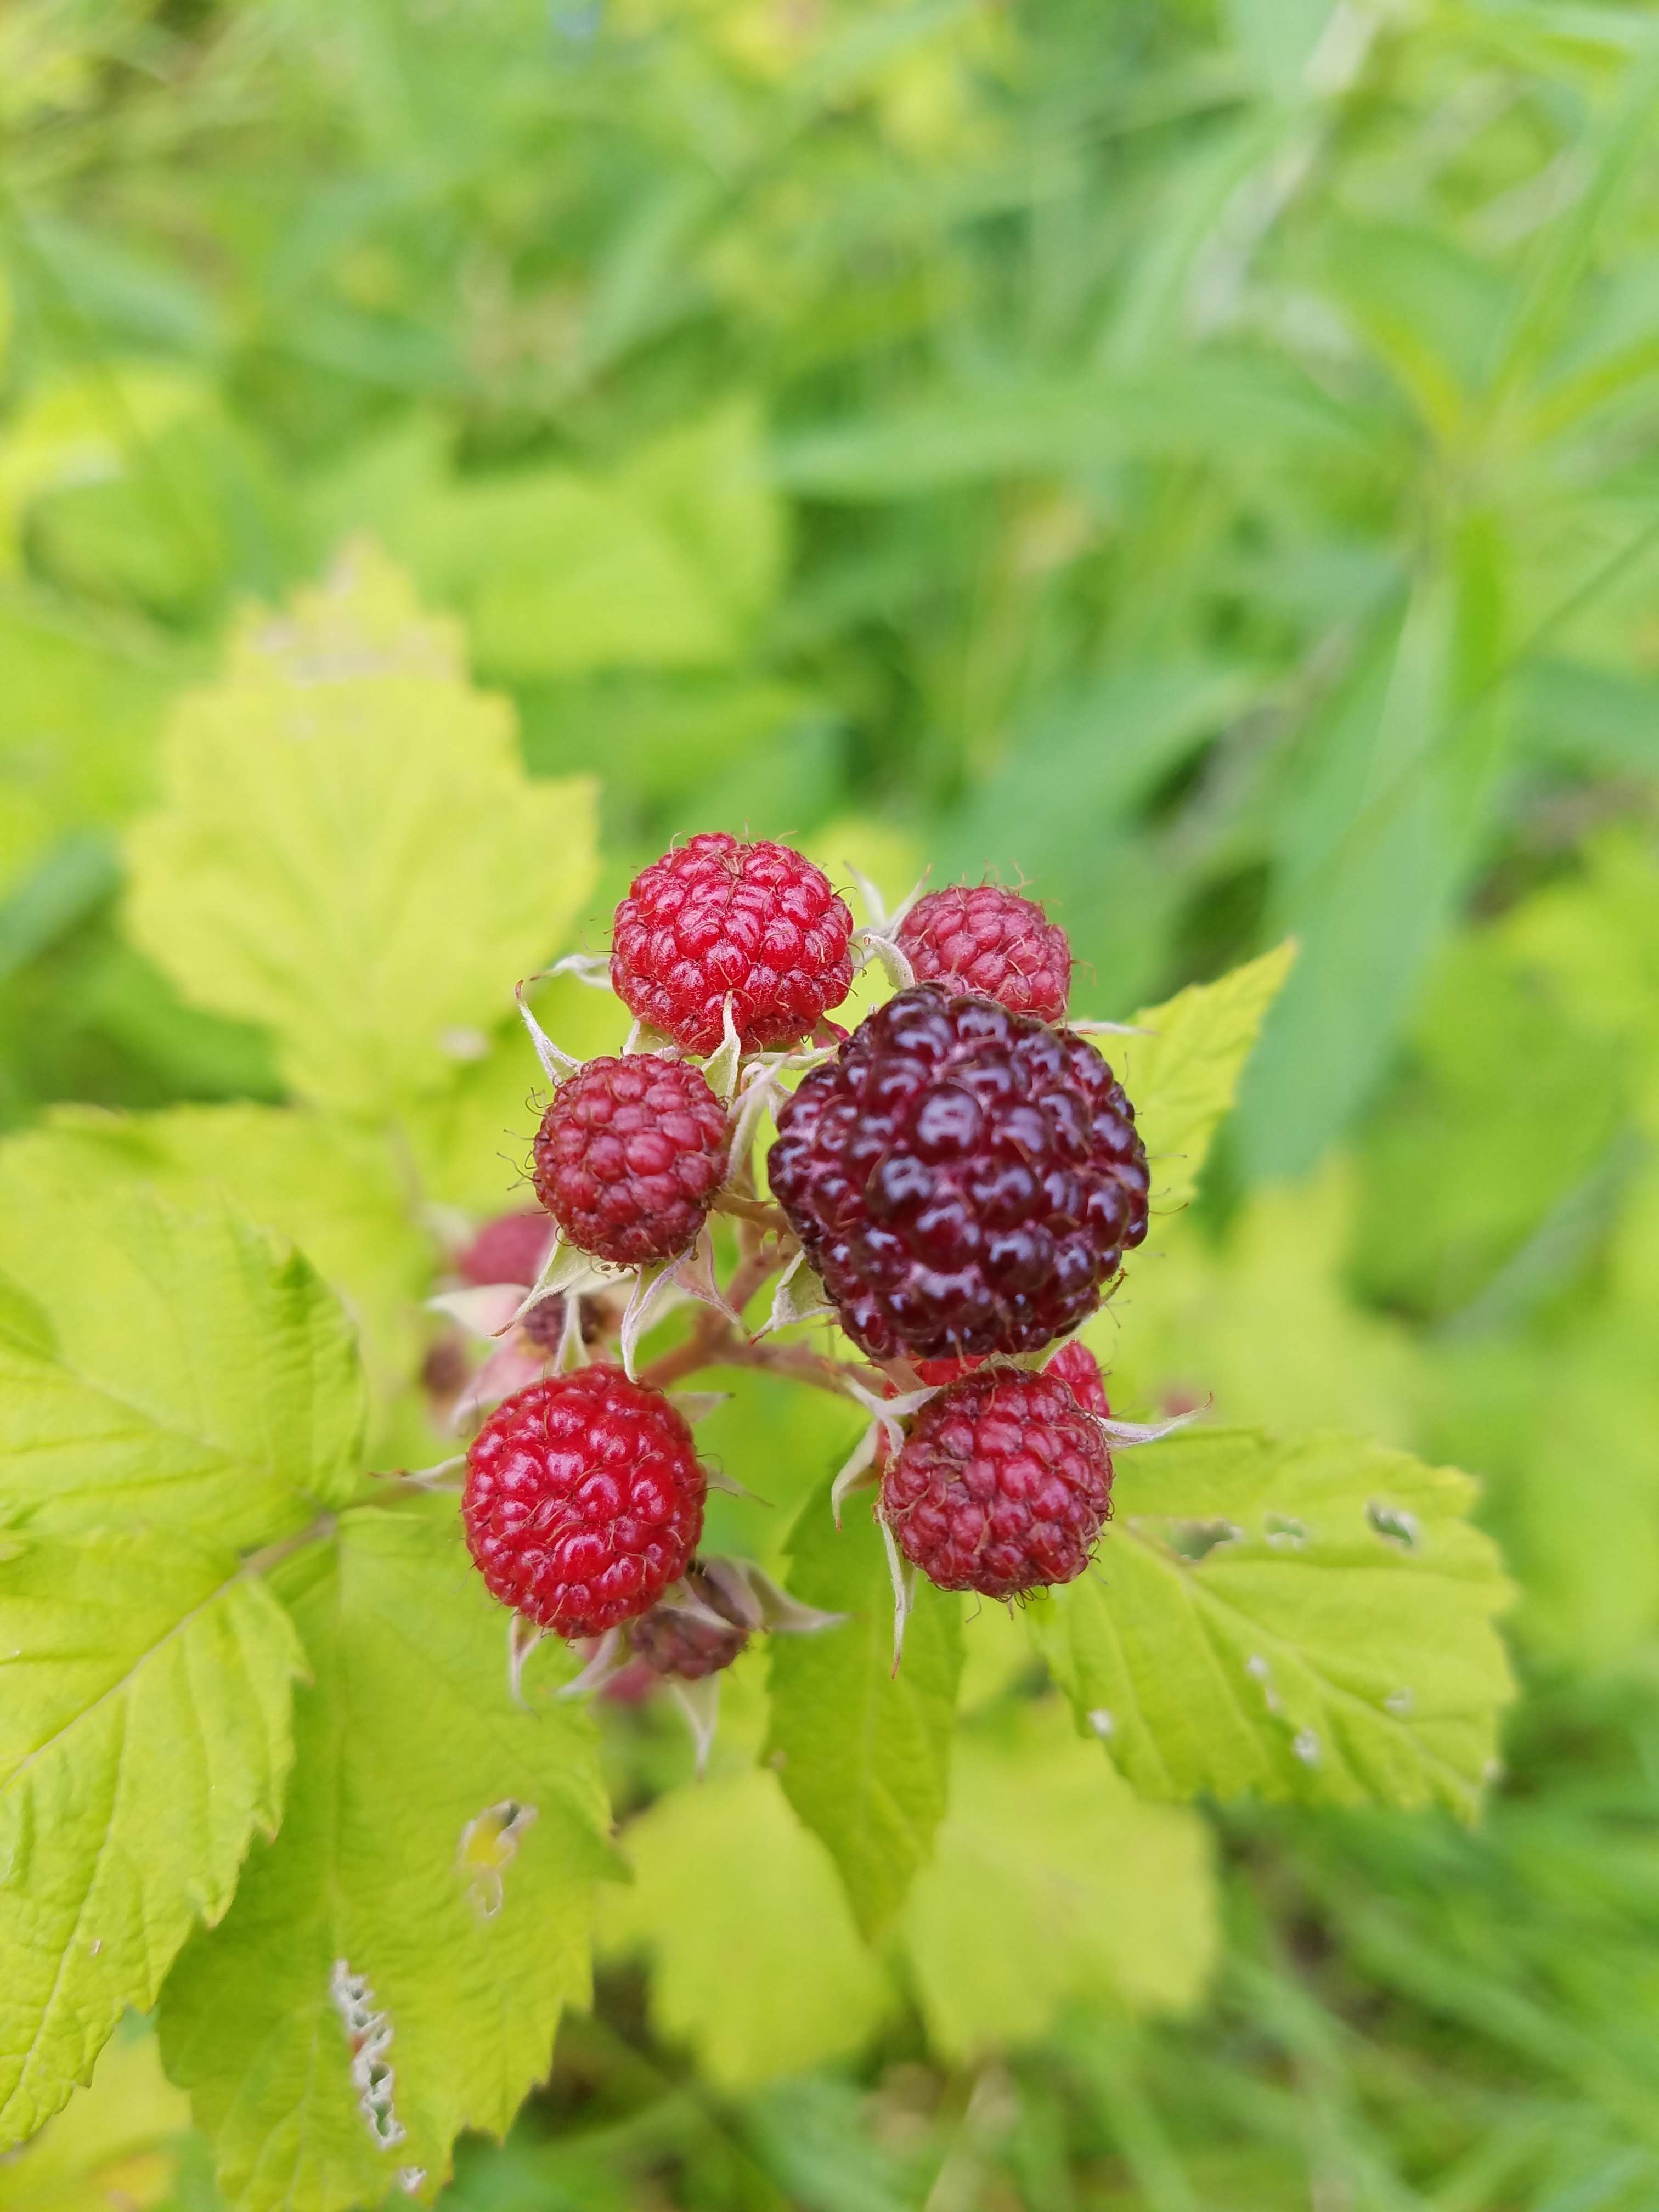 Wild black raspberries on the walking trail-some even ripe enough to eat!